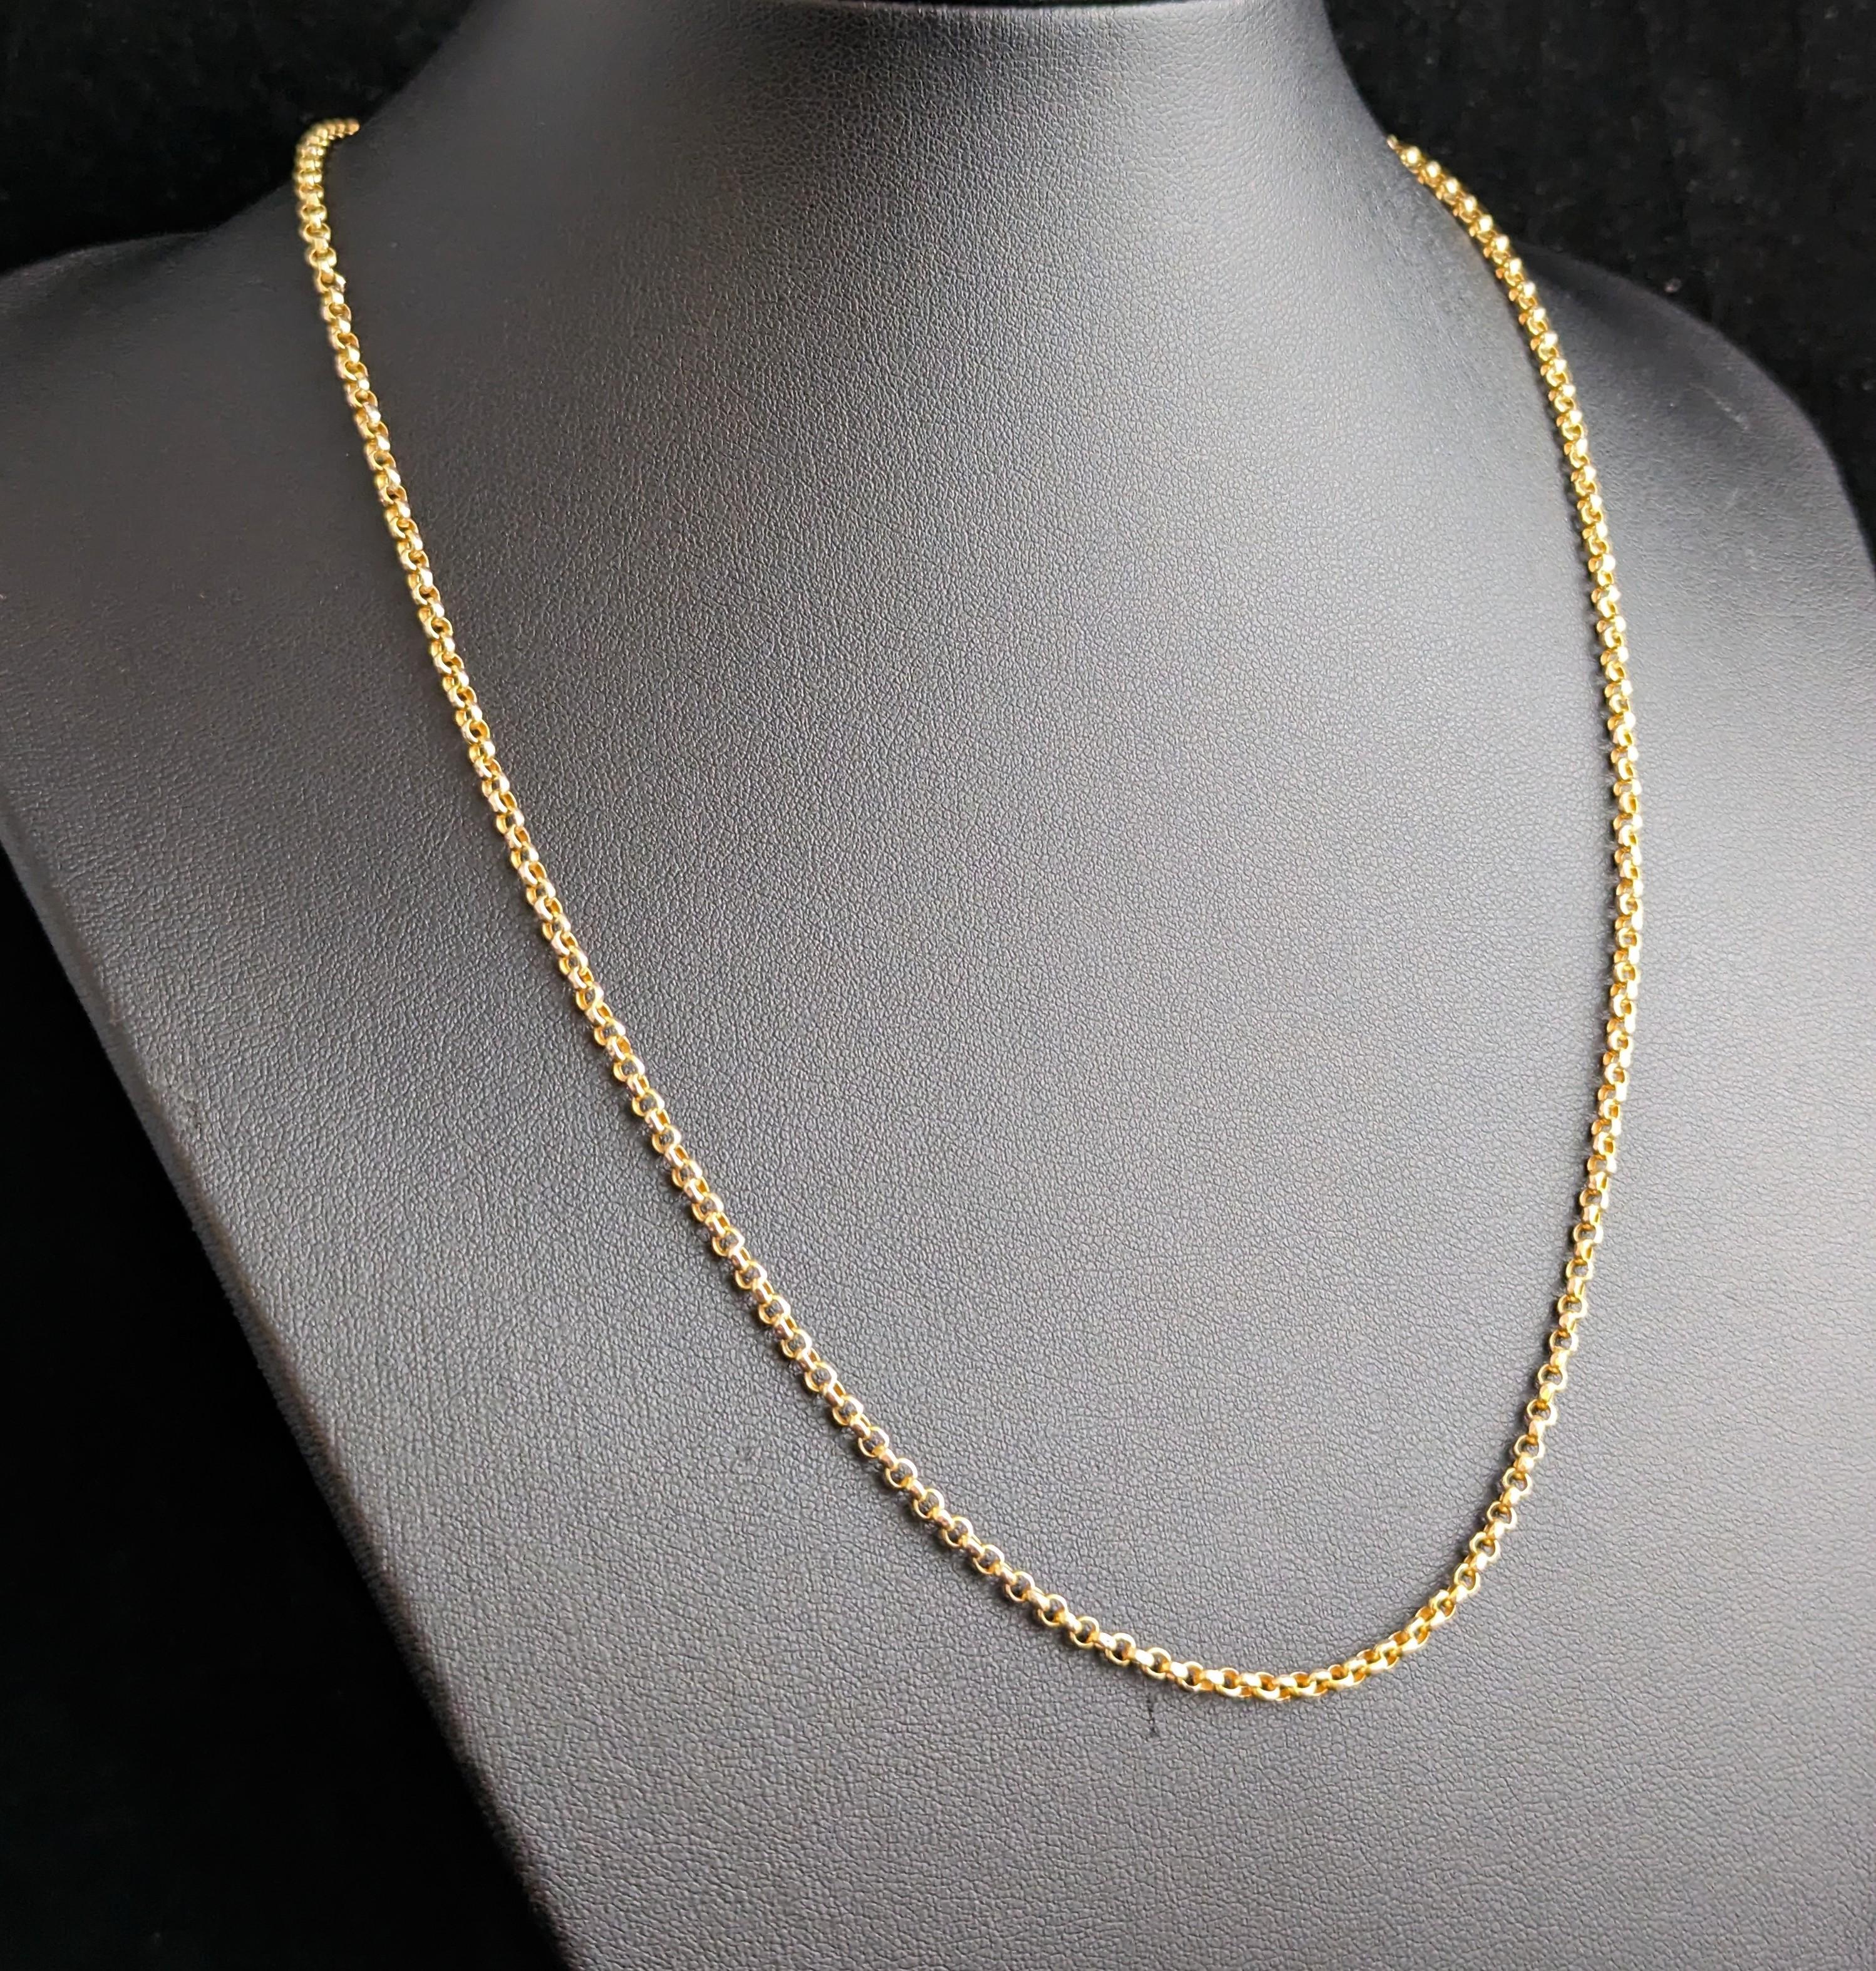 Antique 9k yellow gold Belcher link chain necklace, Edwardian  For Sale 3